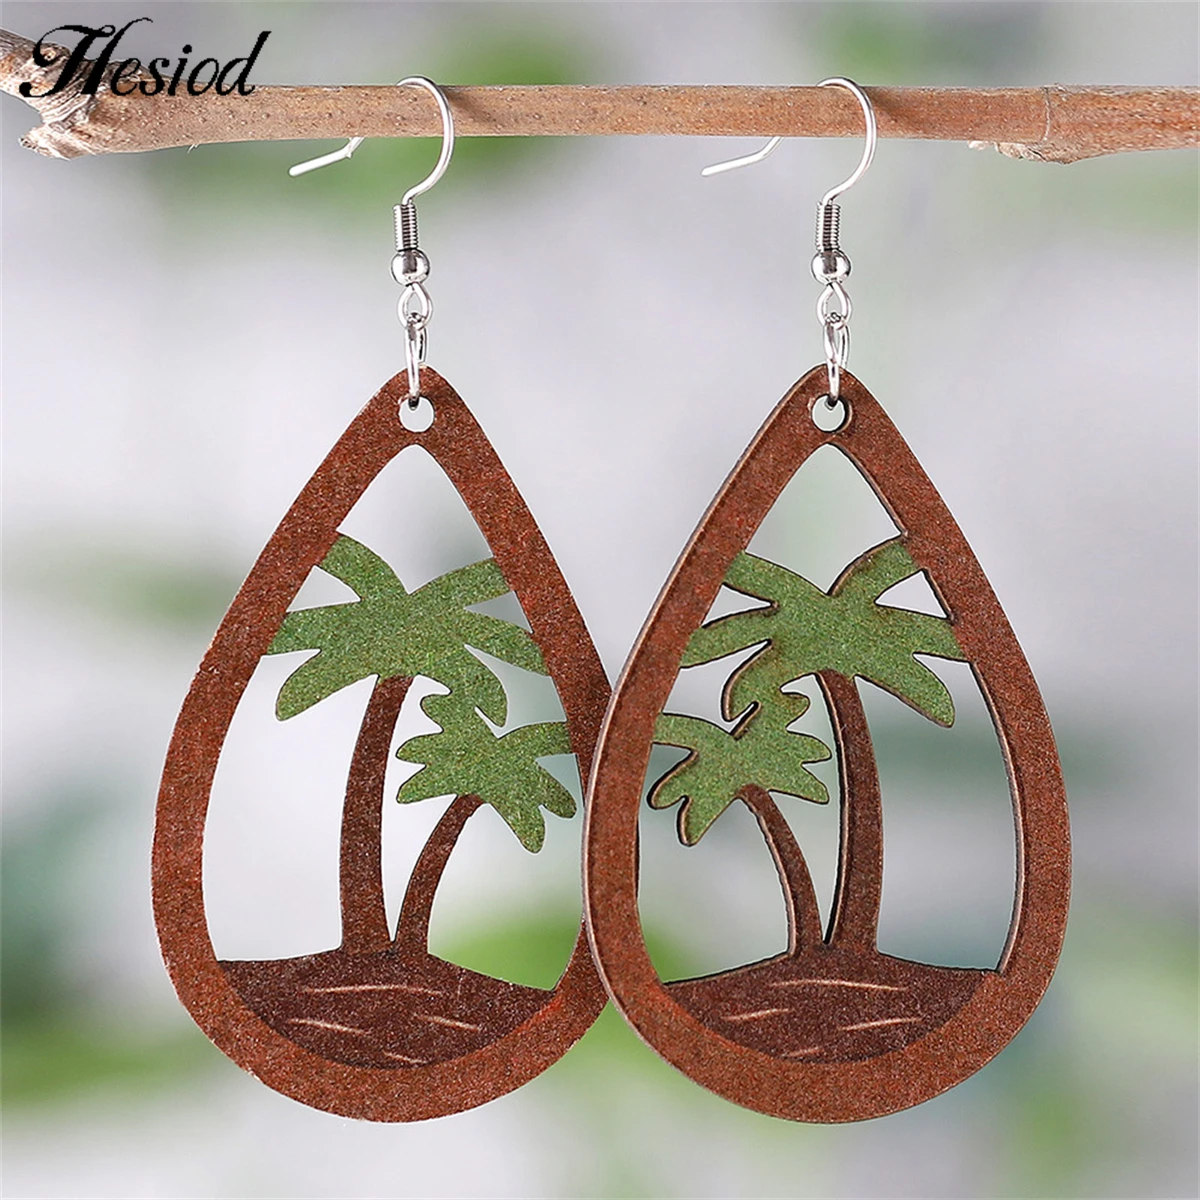 

New Trendy Beach Coconut Tree Hollow Wooden Pendant Hanging Dangle Earrings For Women Piercing Jewelry Accessories Gifts